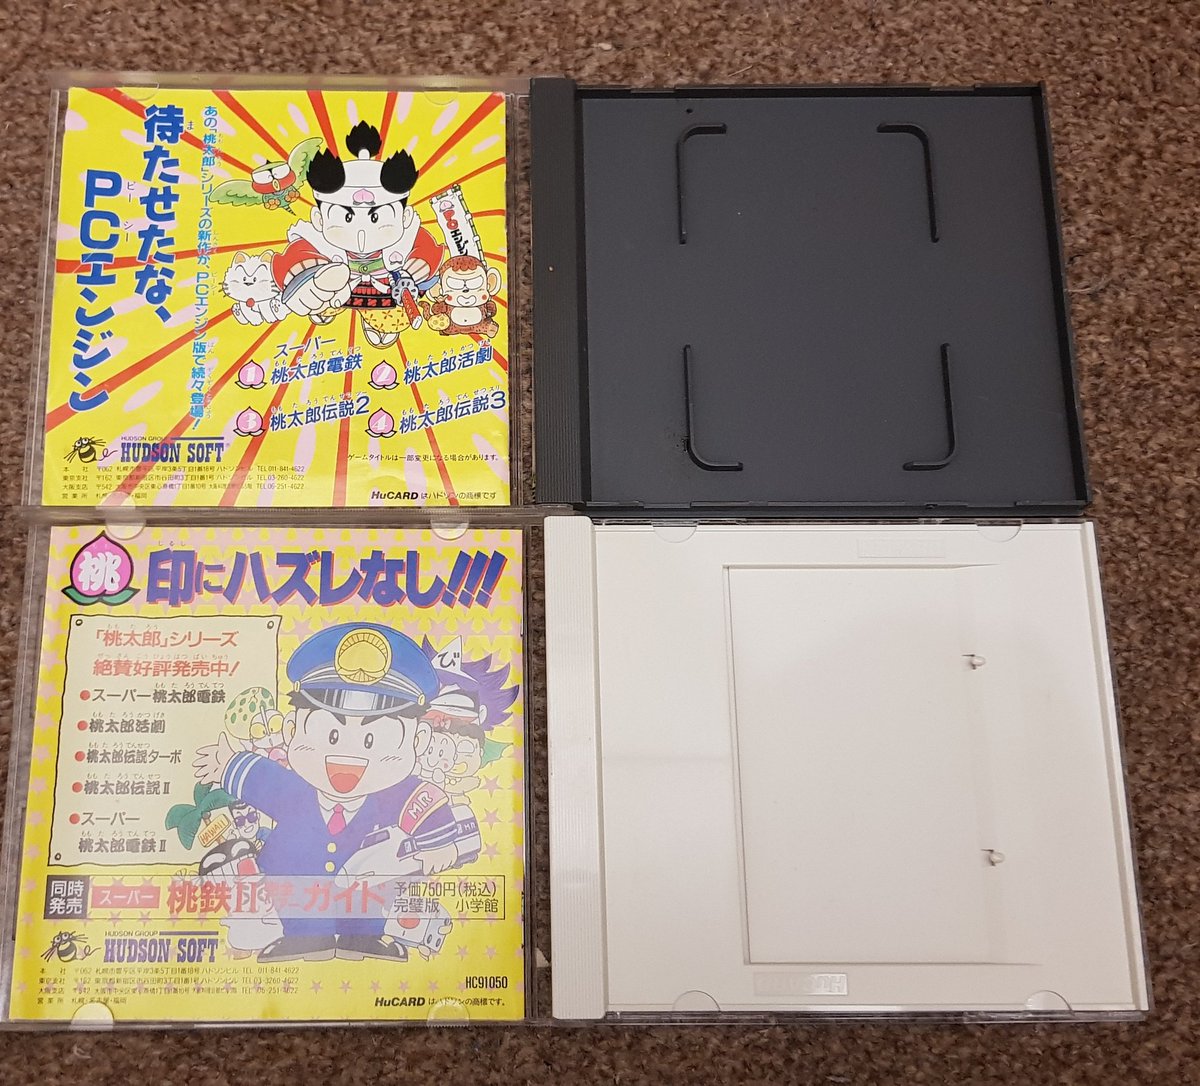 So yesterday I opened up my PC Engine pickups from #PlayExpoManchester and... empty.

Gutted isnt the word. 😭

Always check your boxes before you leave gamers... 😢